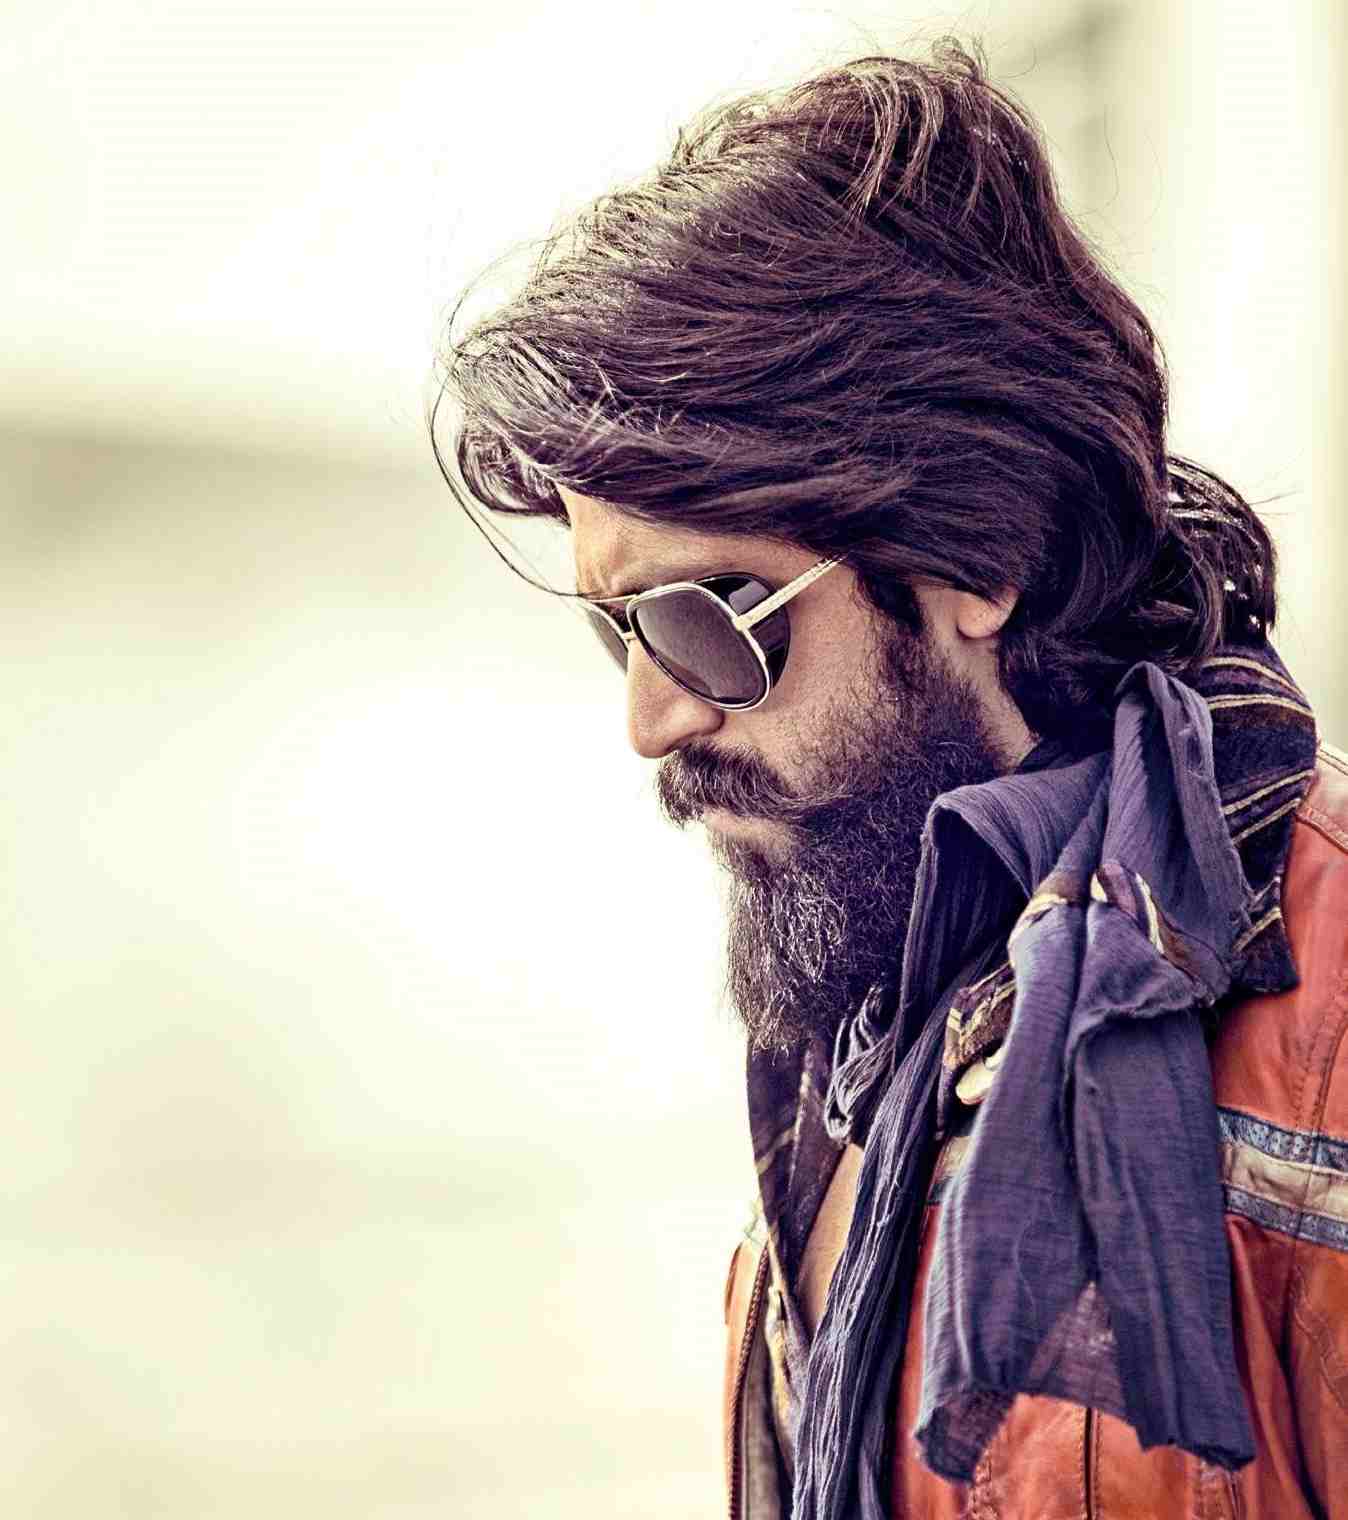 Kgf Wallpaper Yash Photos / Yash in KGF | Movie photo, Actor picture